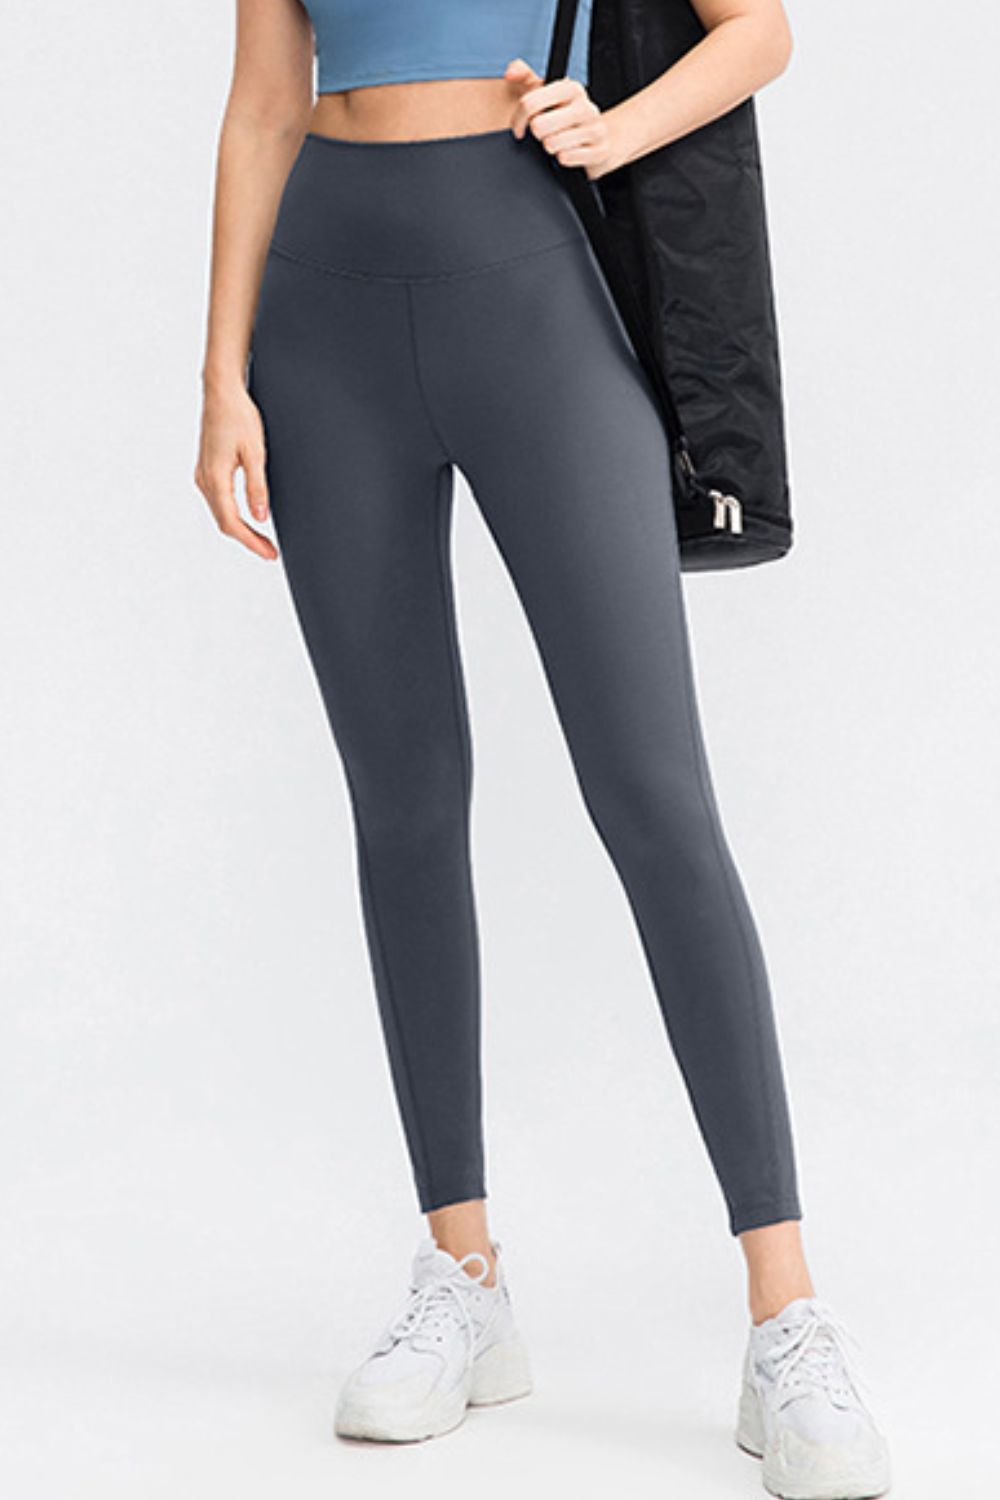 Slim Fit Wide Waistband Long Sports Pants - Leggings - FITGGINS